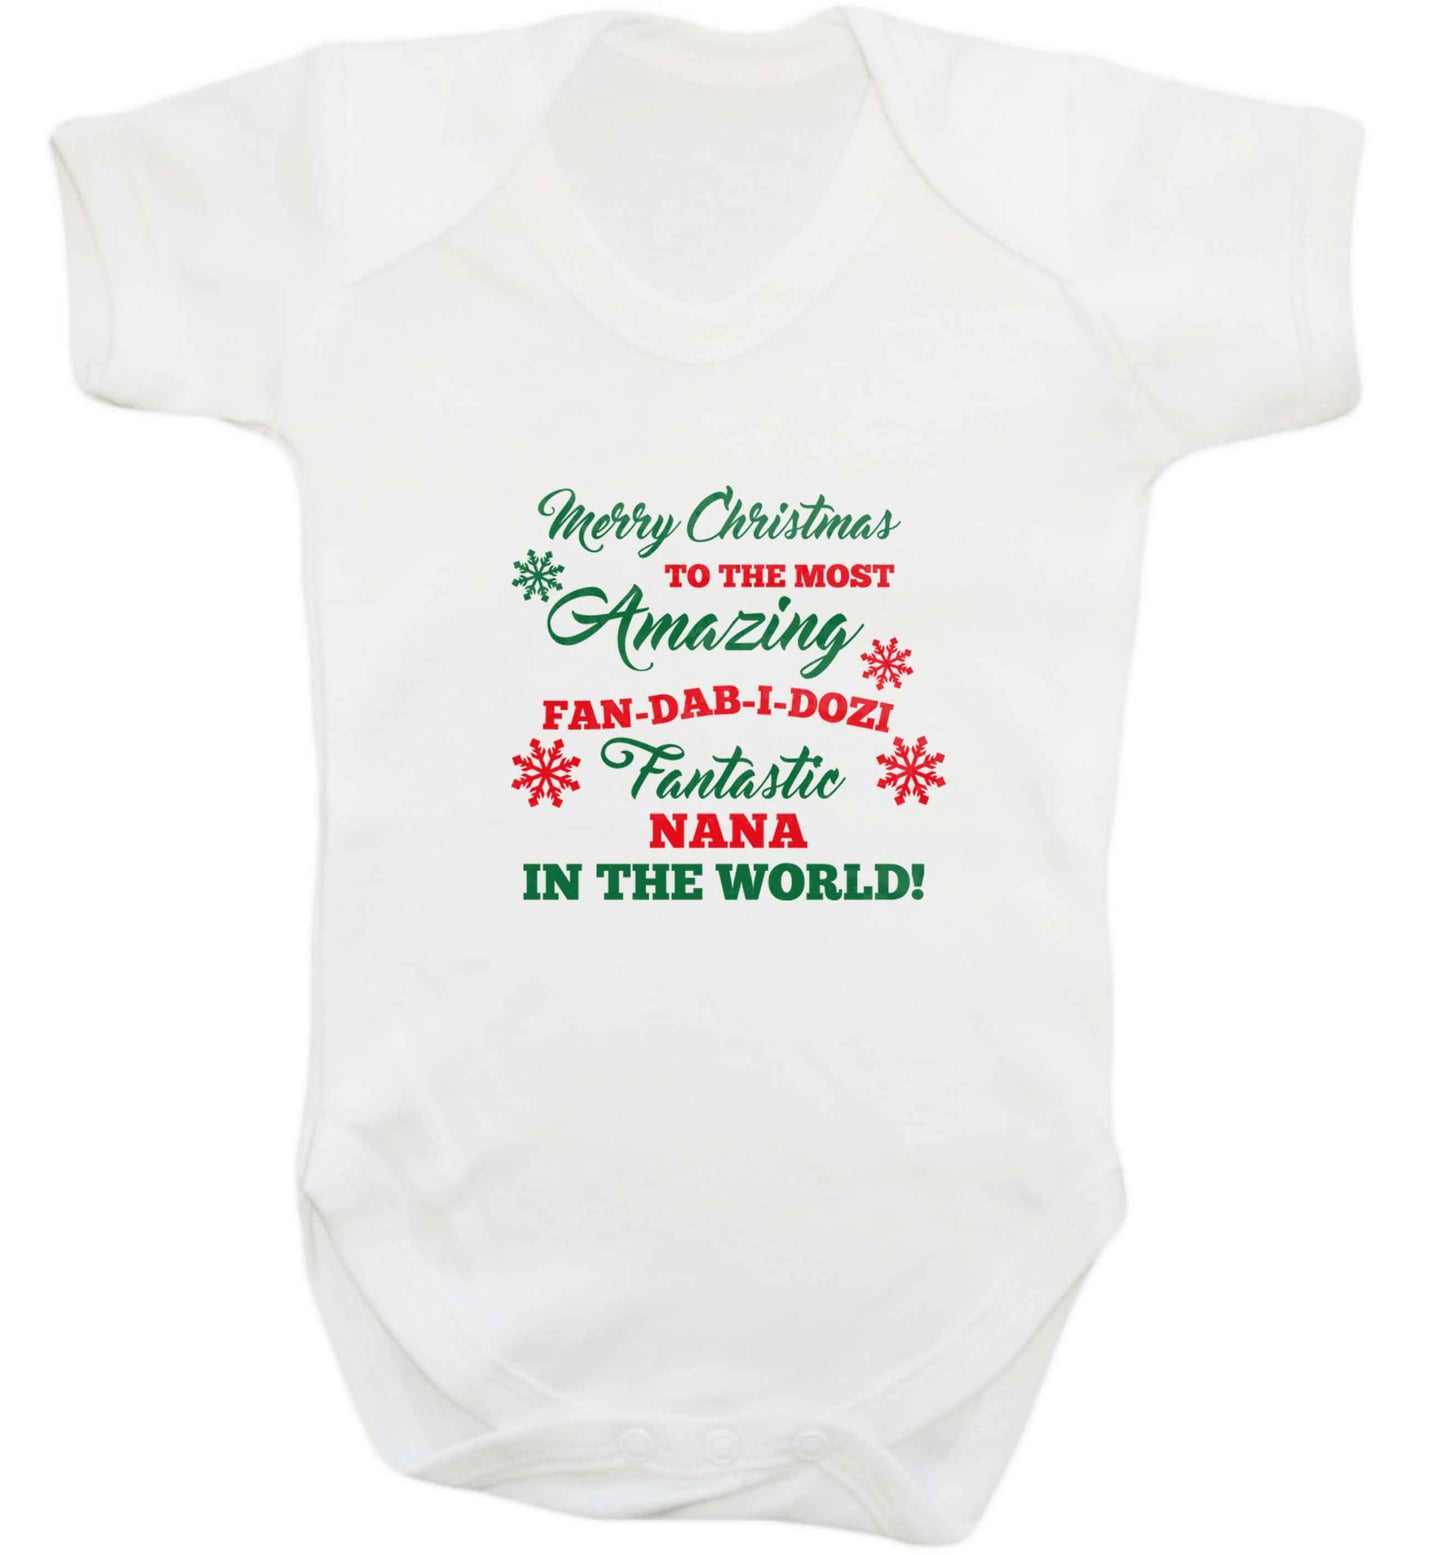 Merry Christmas to the most amazing fan-dab-i-dozi fantasic Nana in the world baby vest white 18-24 months